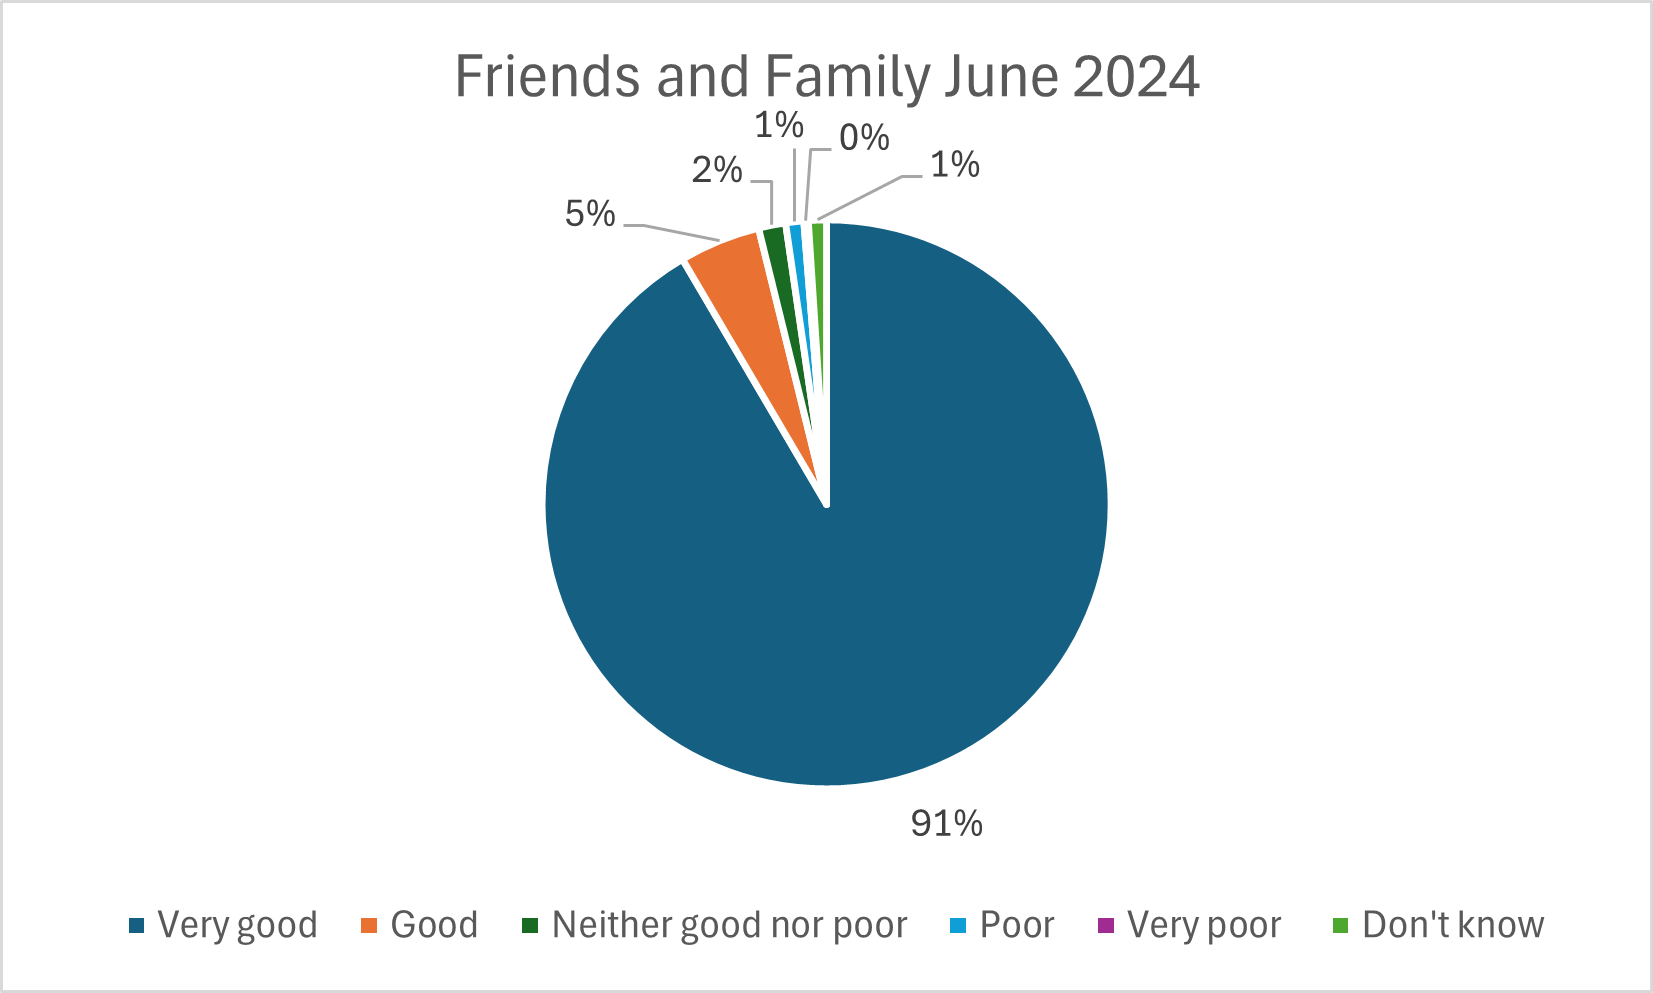 Friends and Family - June 2024